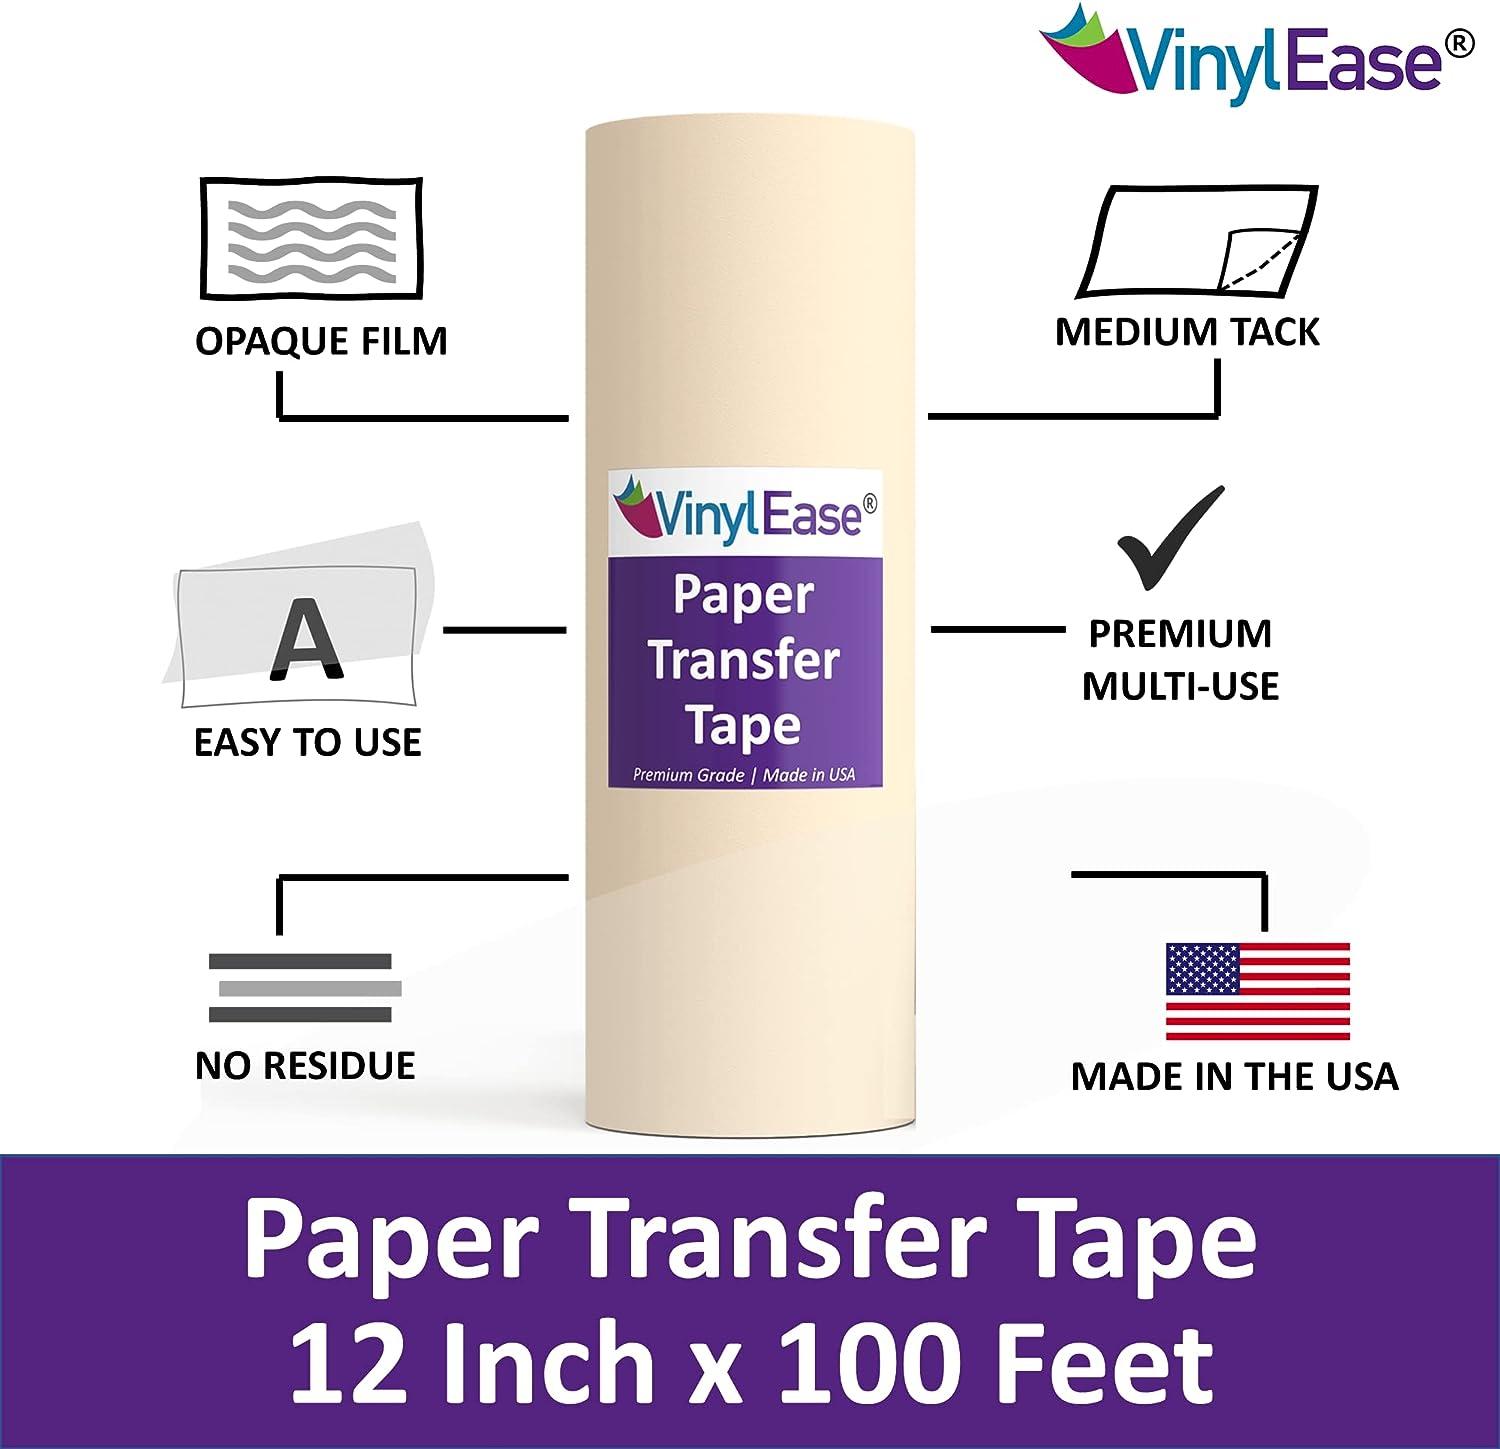  12 x 300' Roll of Clear, High Tack Vinyl Transfer